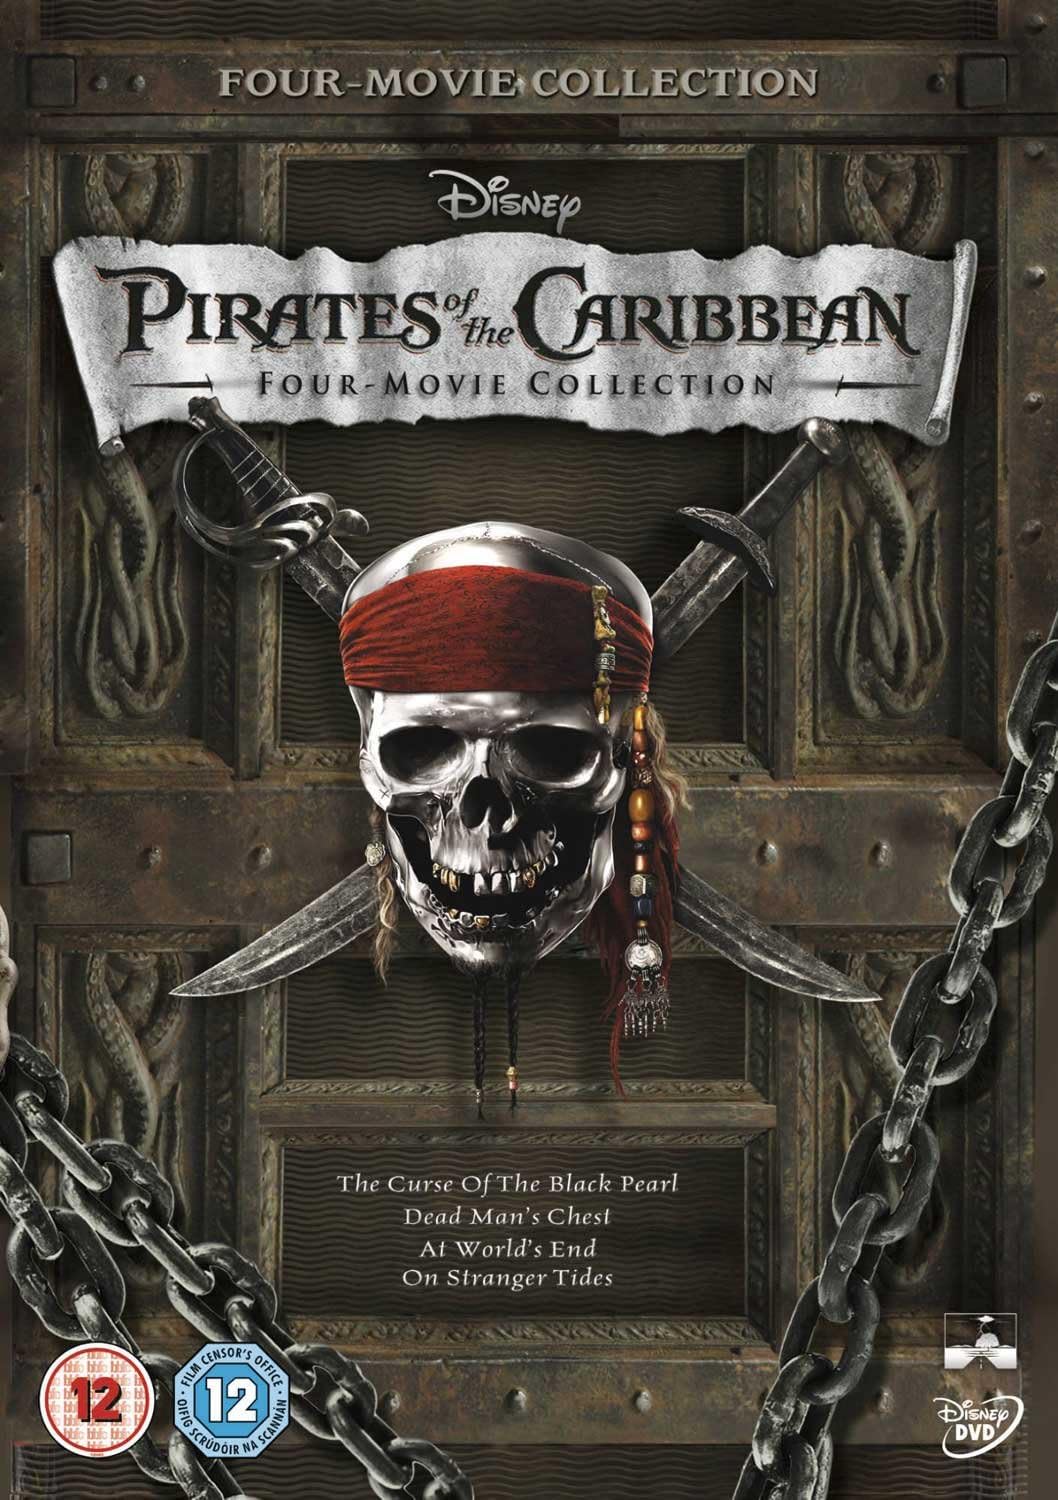 Pirates of the Caribbean 1-4 Box Set DVD Rated 12 (2011) RRP £14.99 CLEARANCE XL £7.99